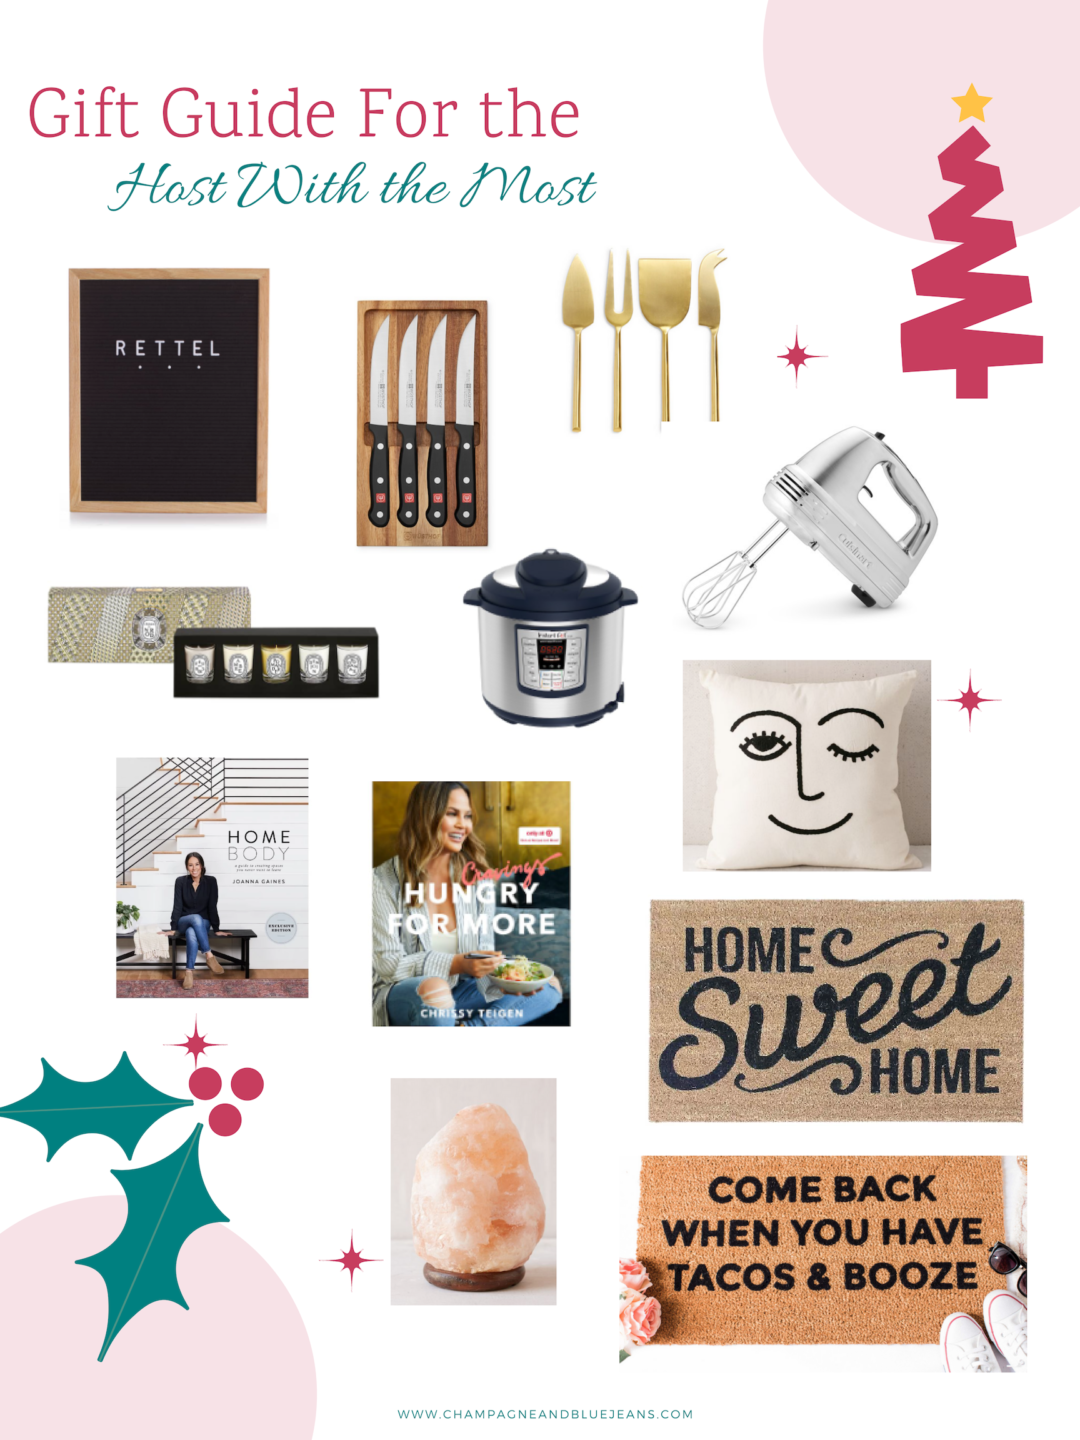 Christmas Gift Guide for the hostess by Champagne and Blue Jeans